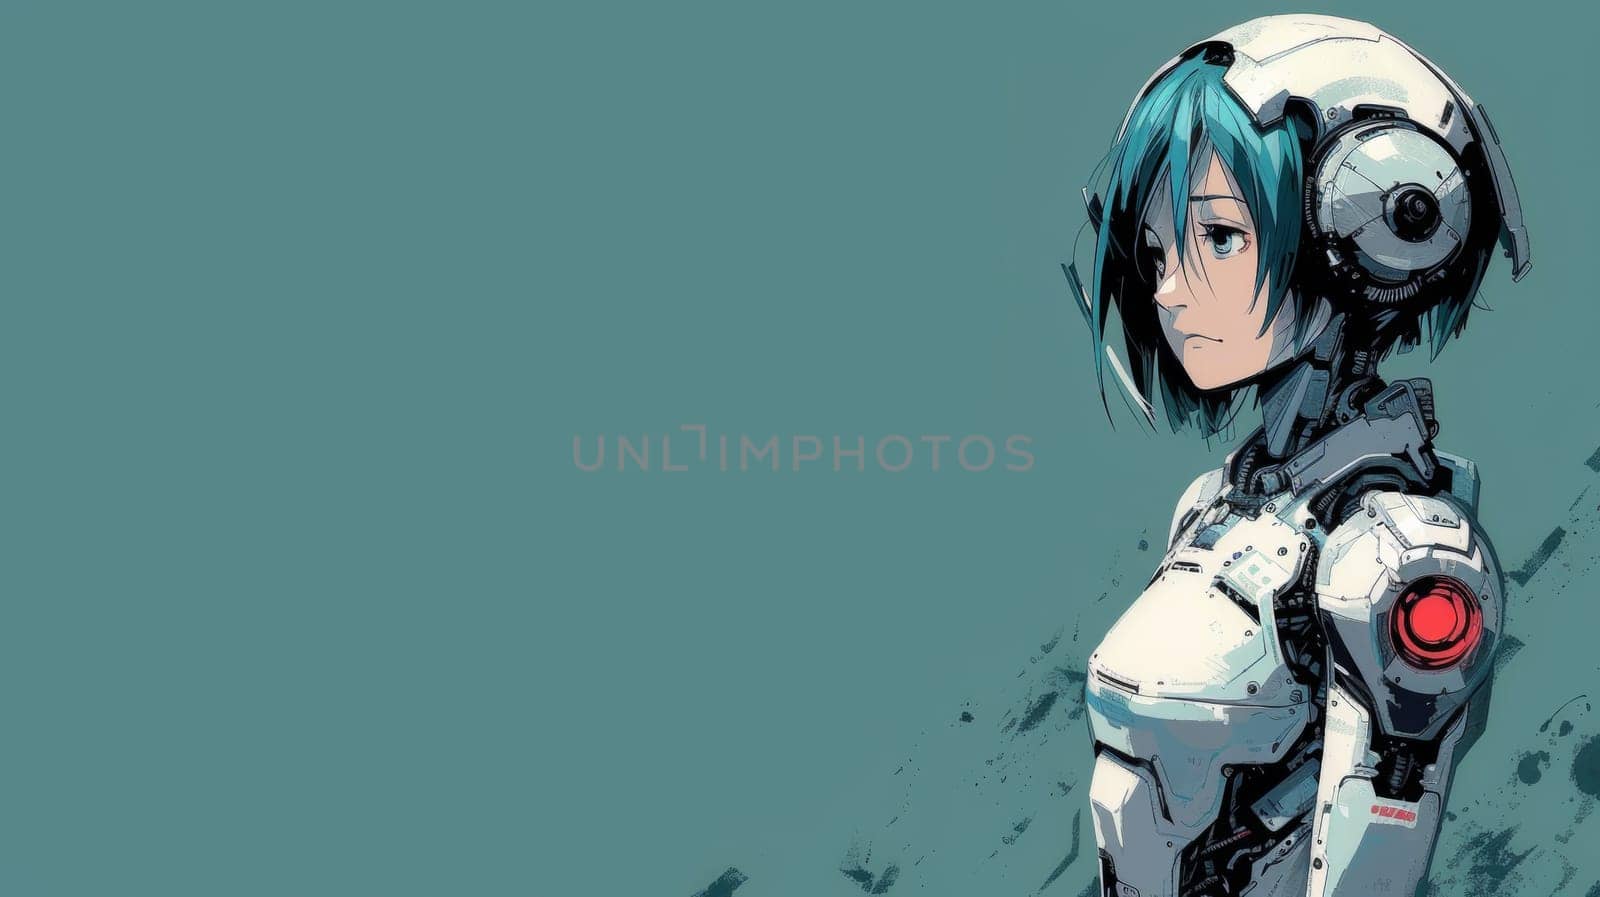 A female robot with blue hair and a white helmet, AI by starush